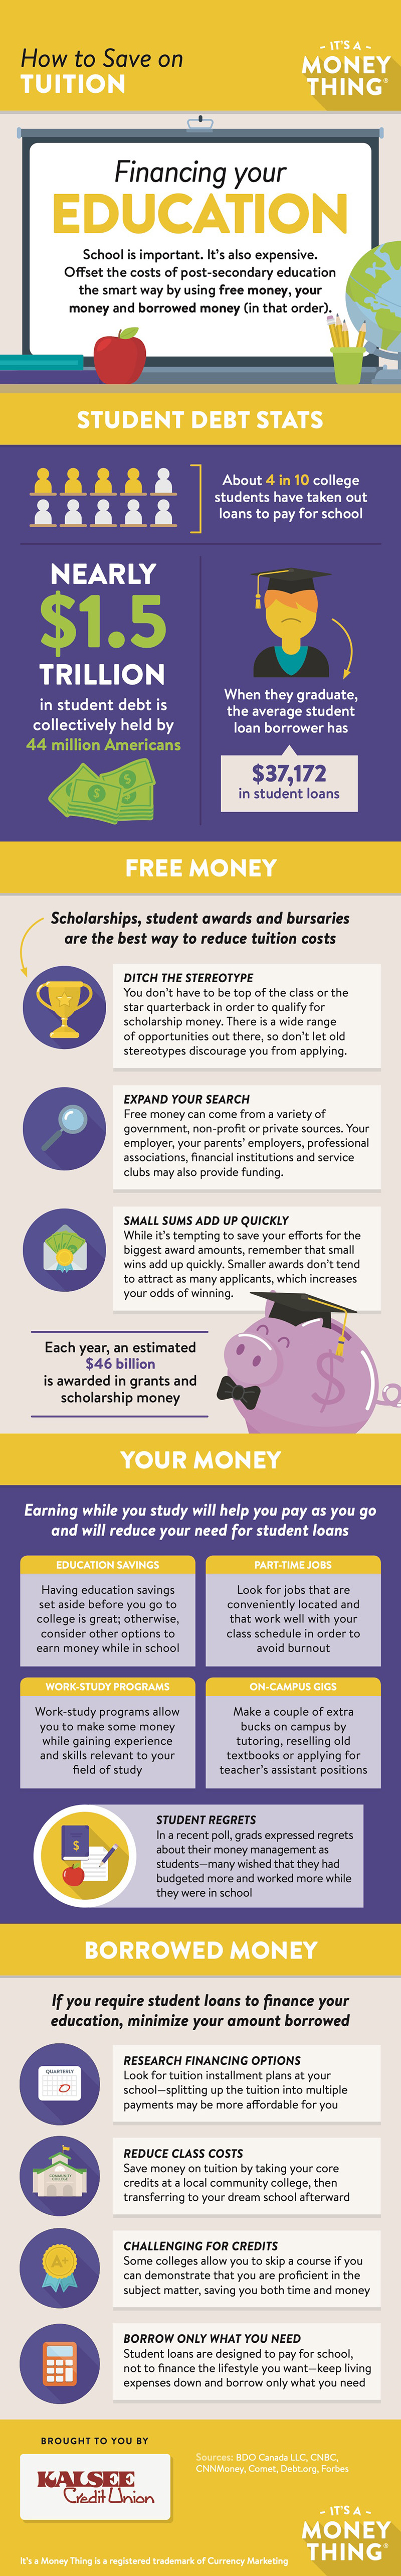 How to Save on Tuition infographic, click for transcription